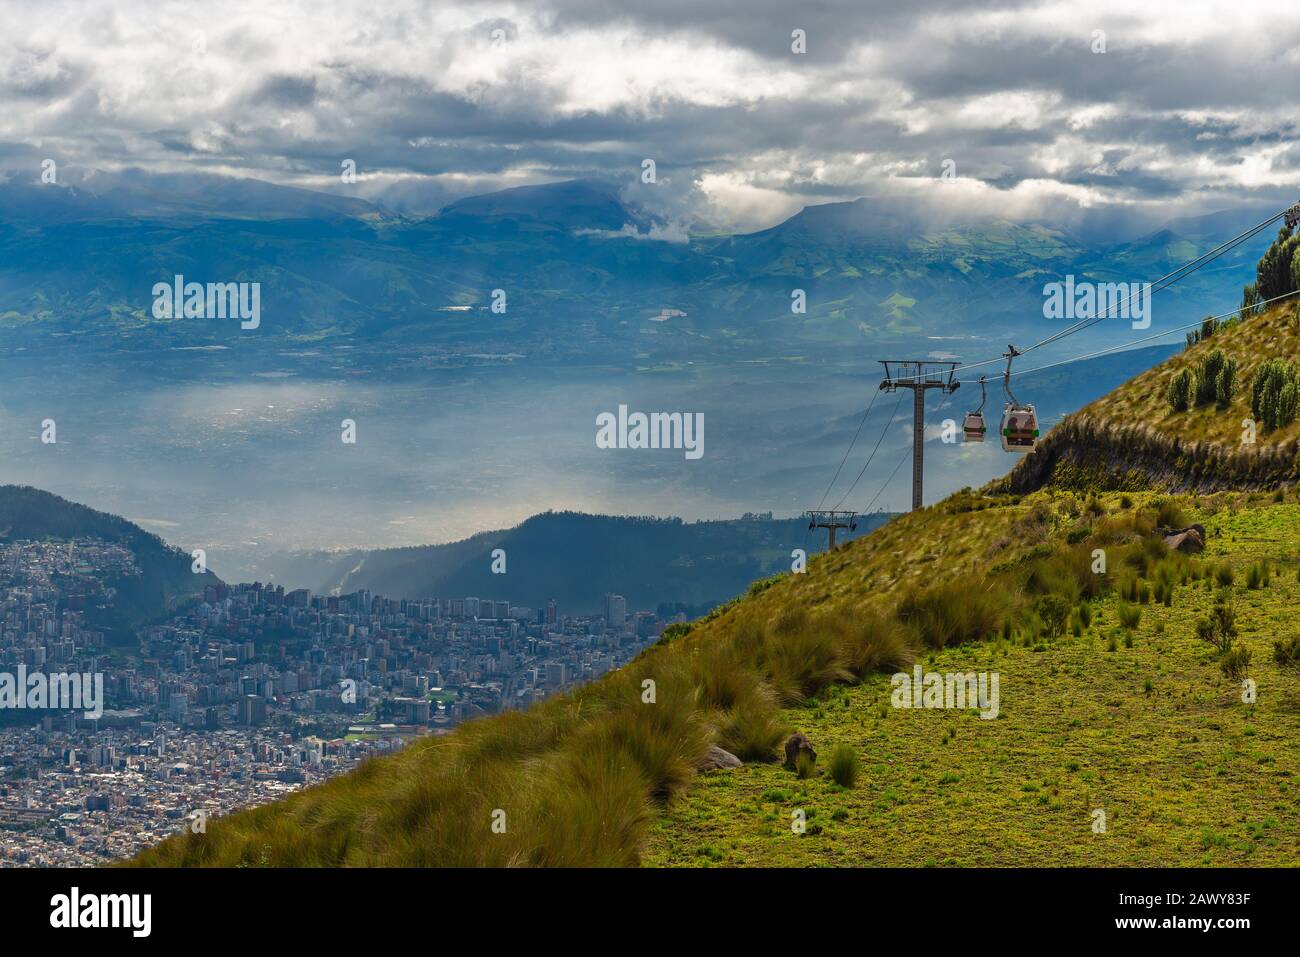 Cityscape of Quito seen from the Pichincha volcano with the cable car of the city called Teleferico, Andes mountain range, Ecuador. Stock Photo